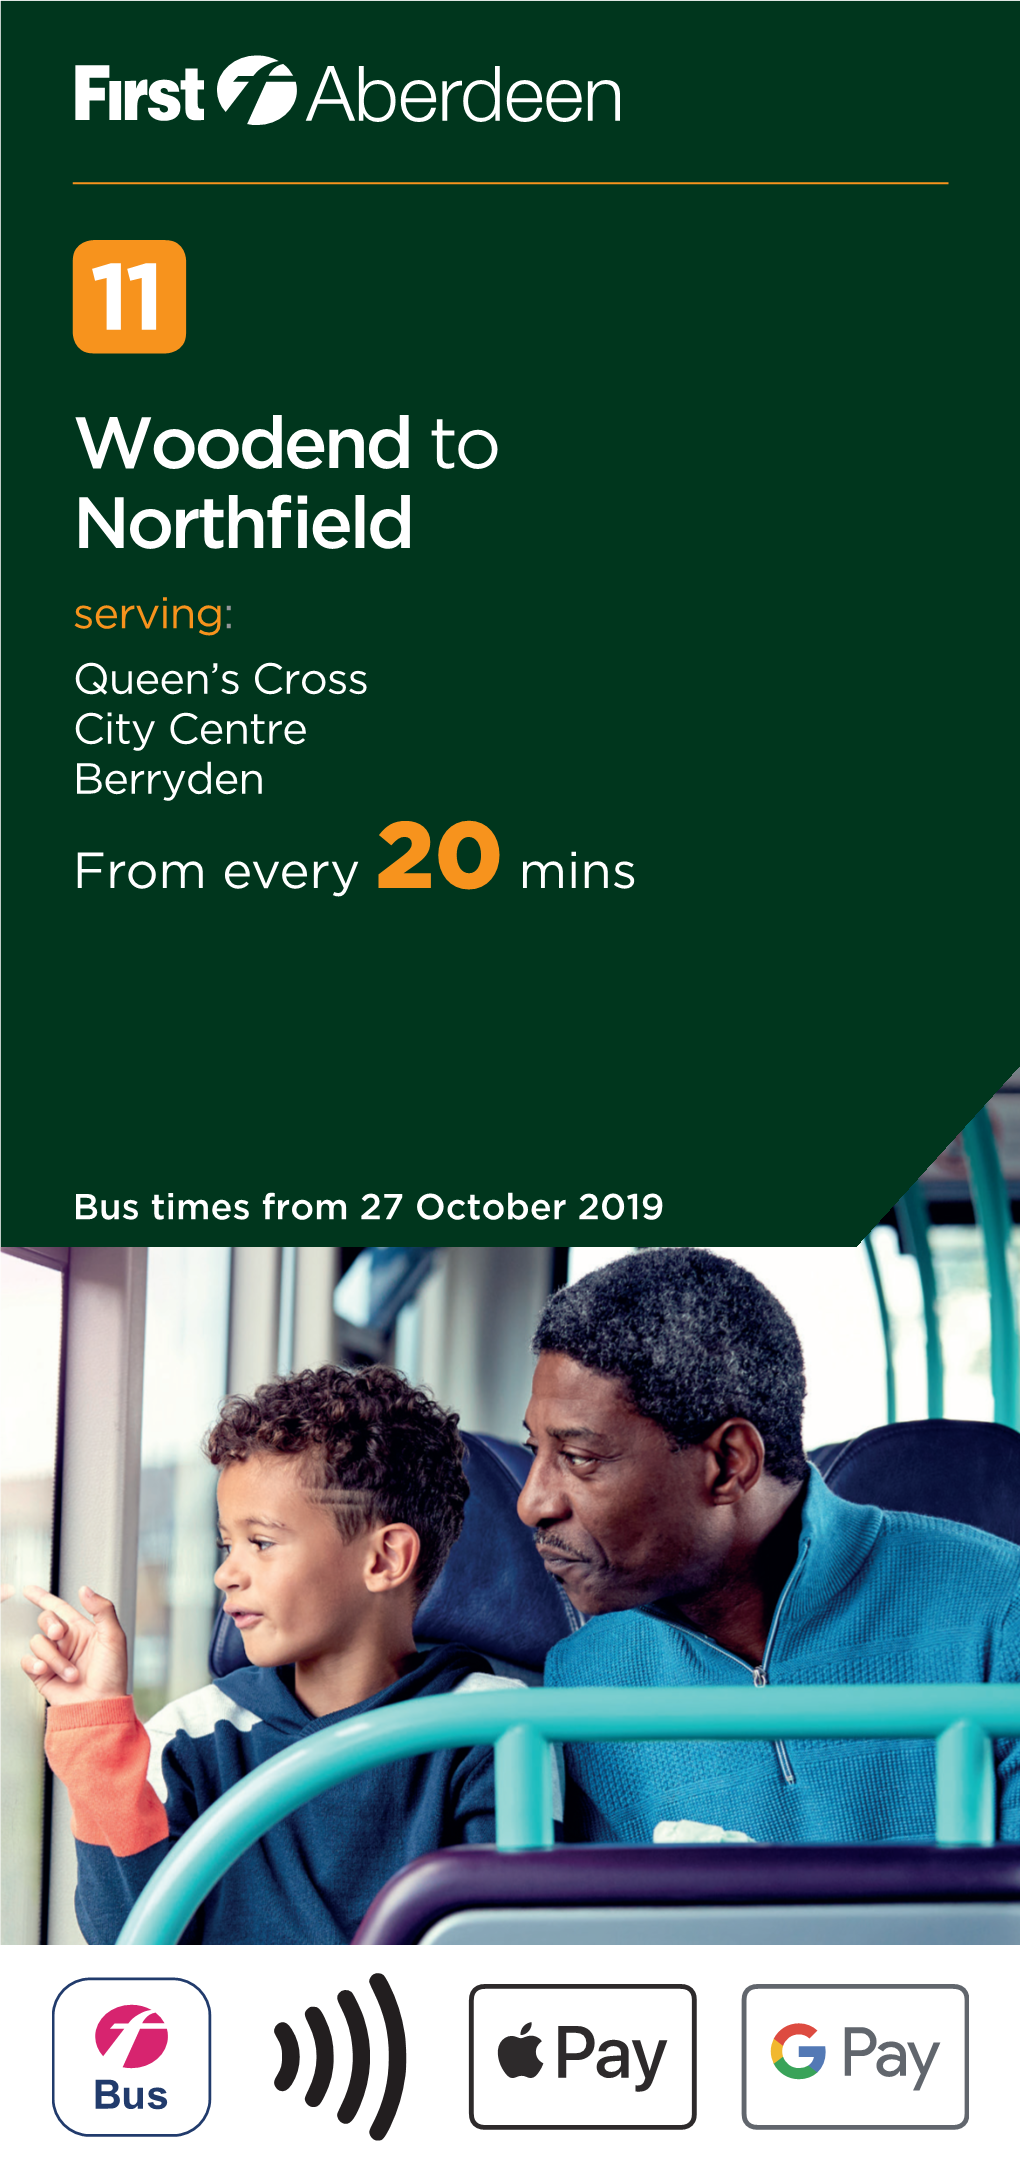 Woodend to Northfield Serving: Queen’S Cross City Centre Berryden from Every 20 Mins